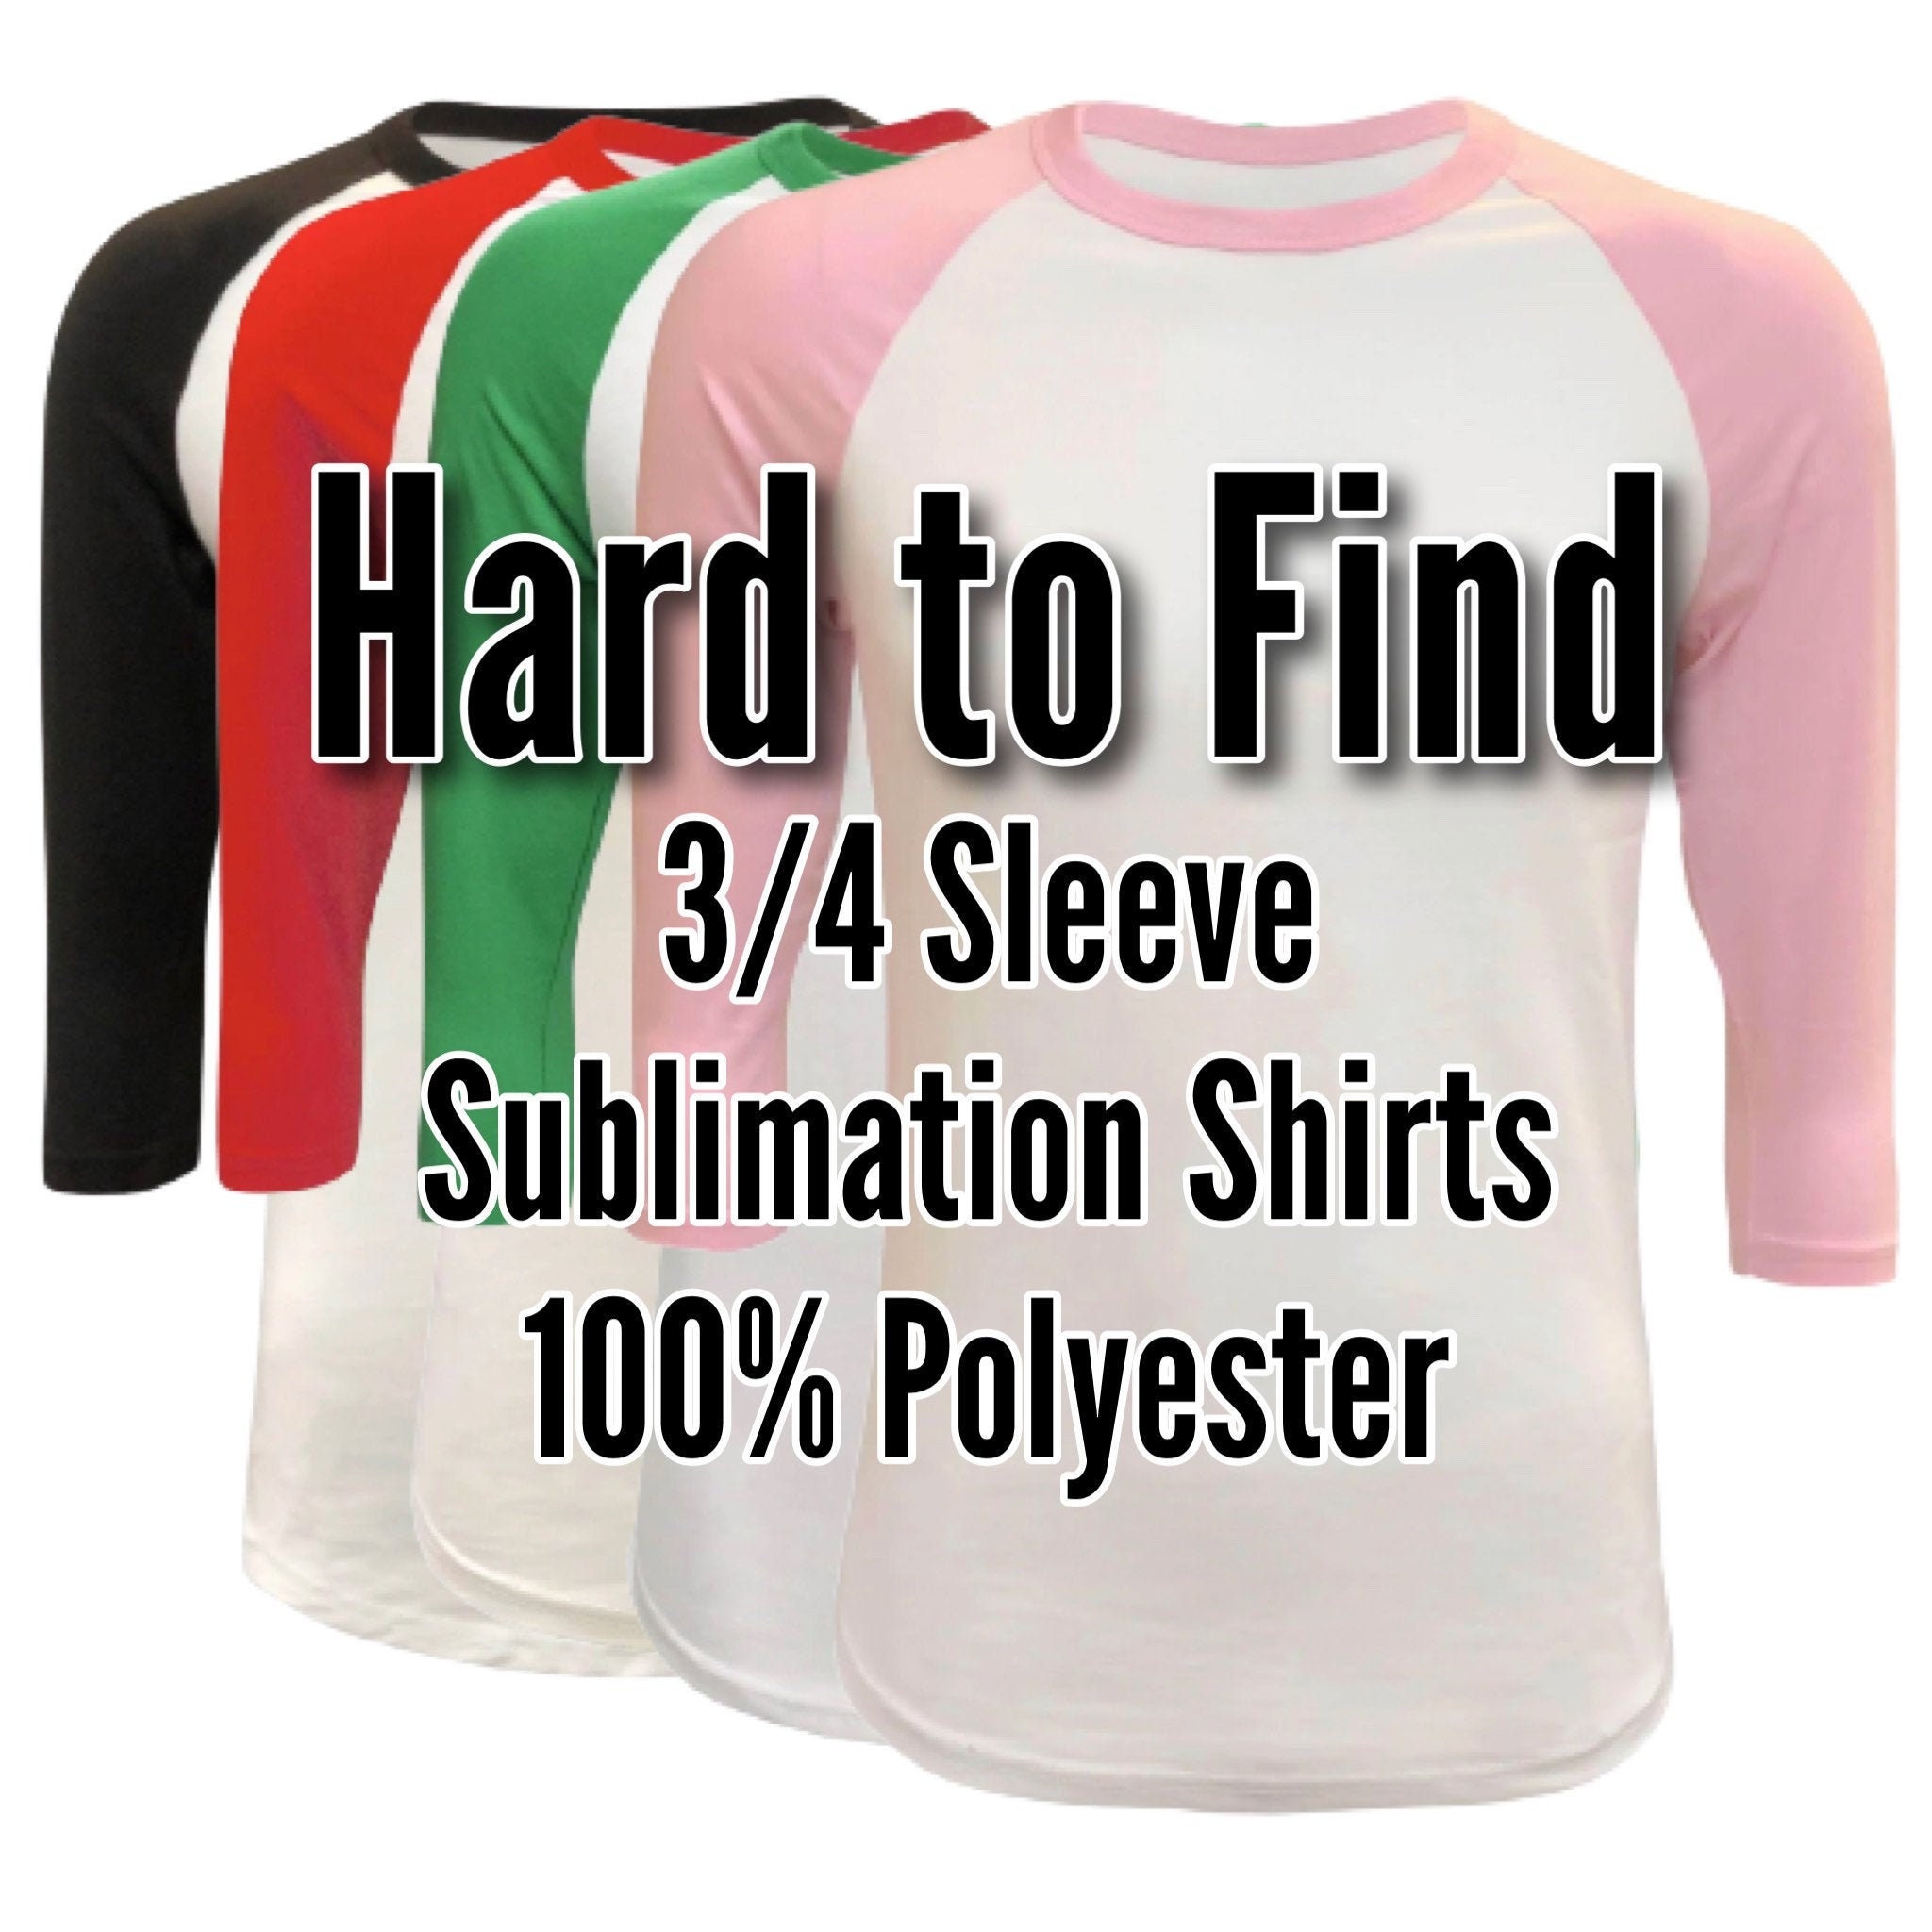 How To Make Sublimation Tee Shirts - Best Design Idea